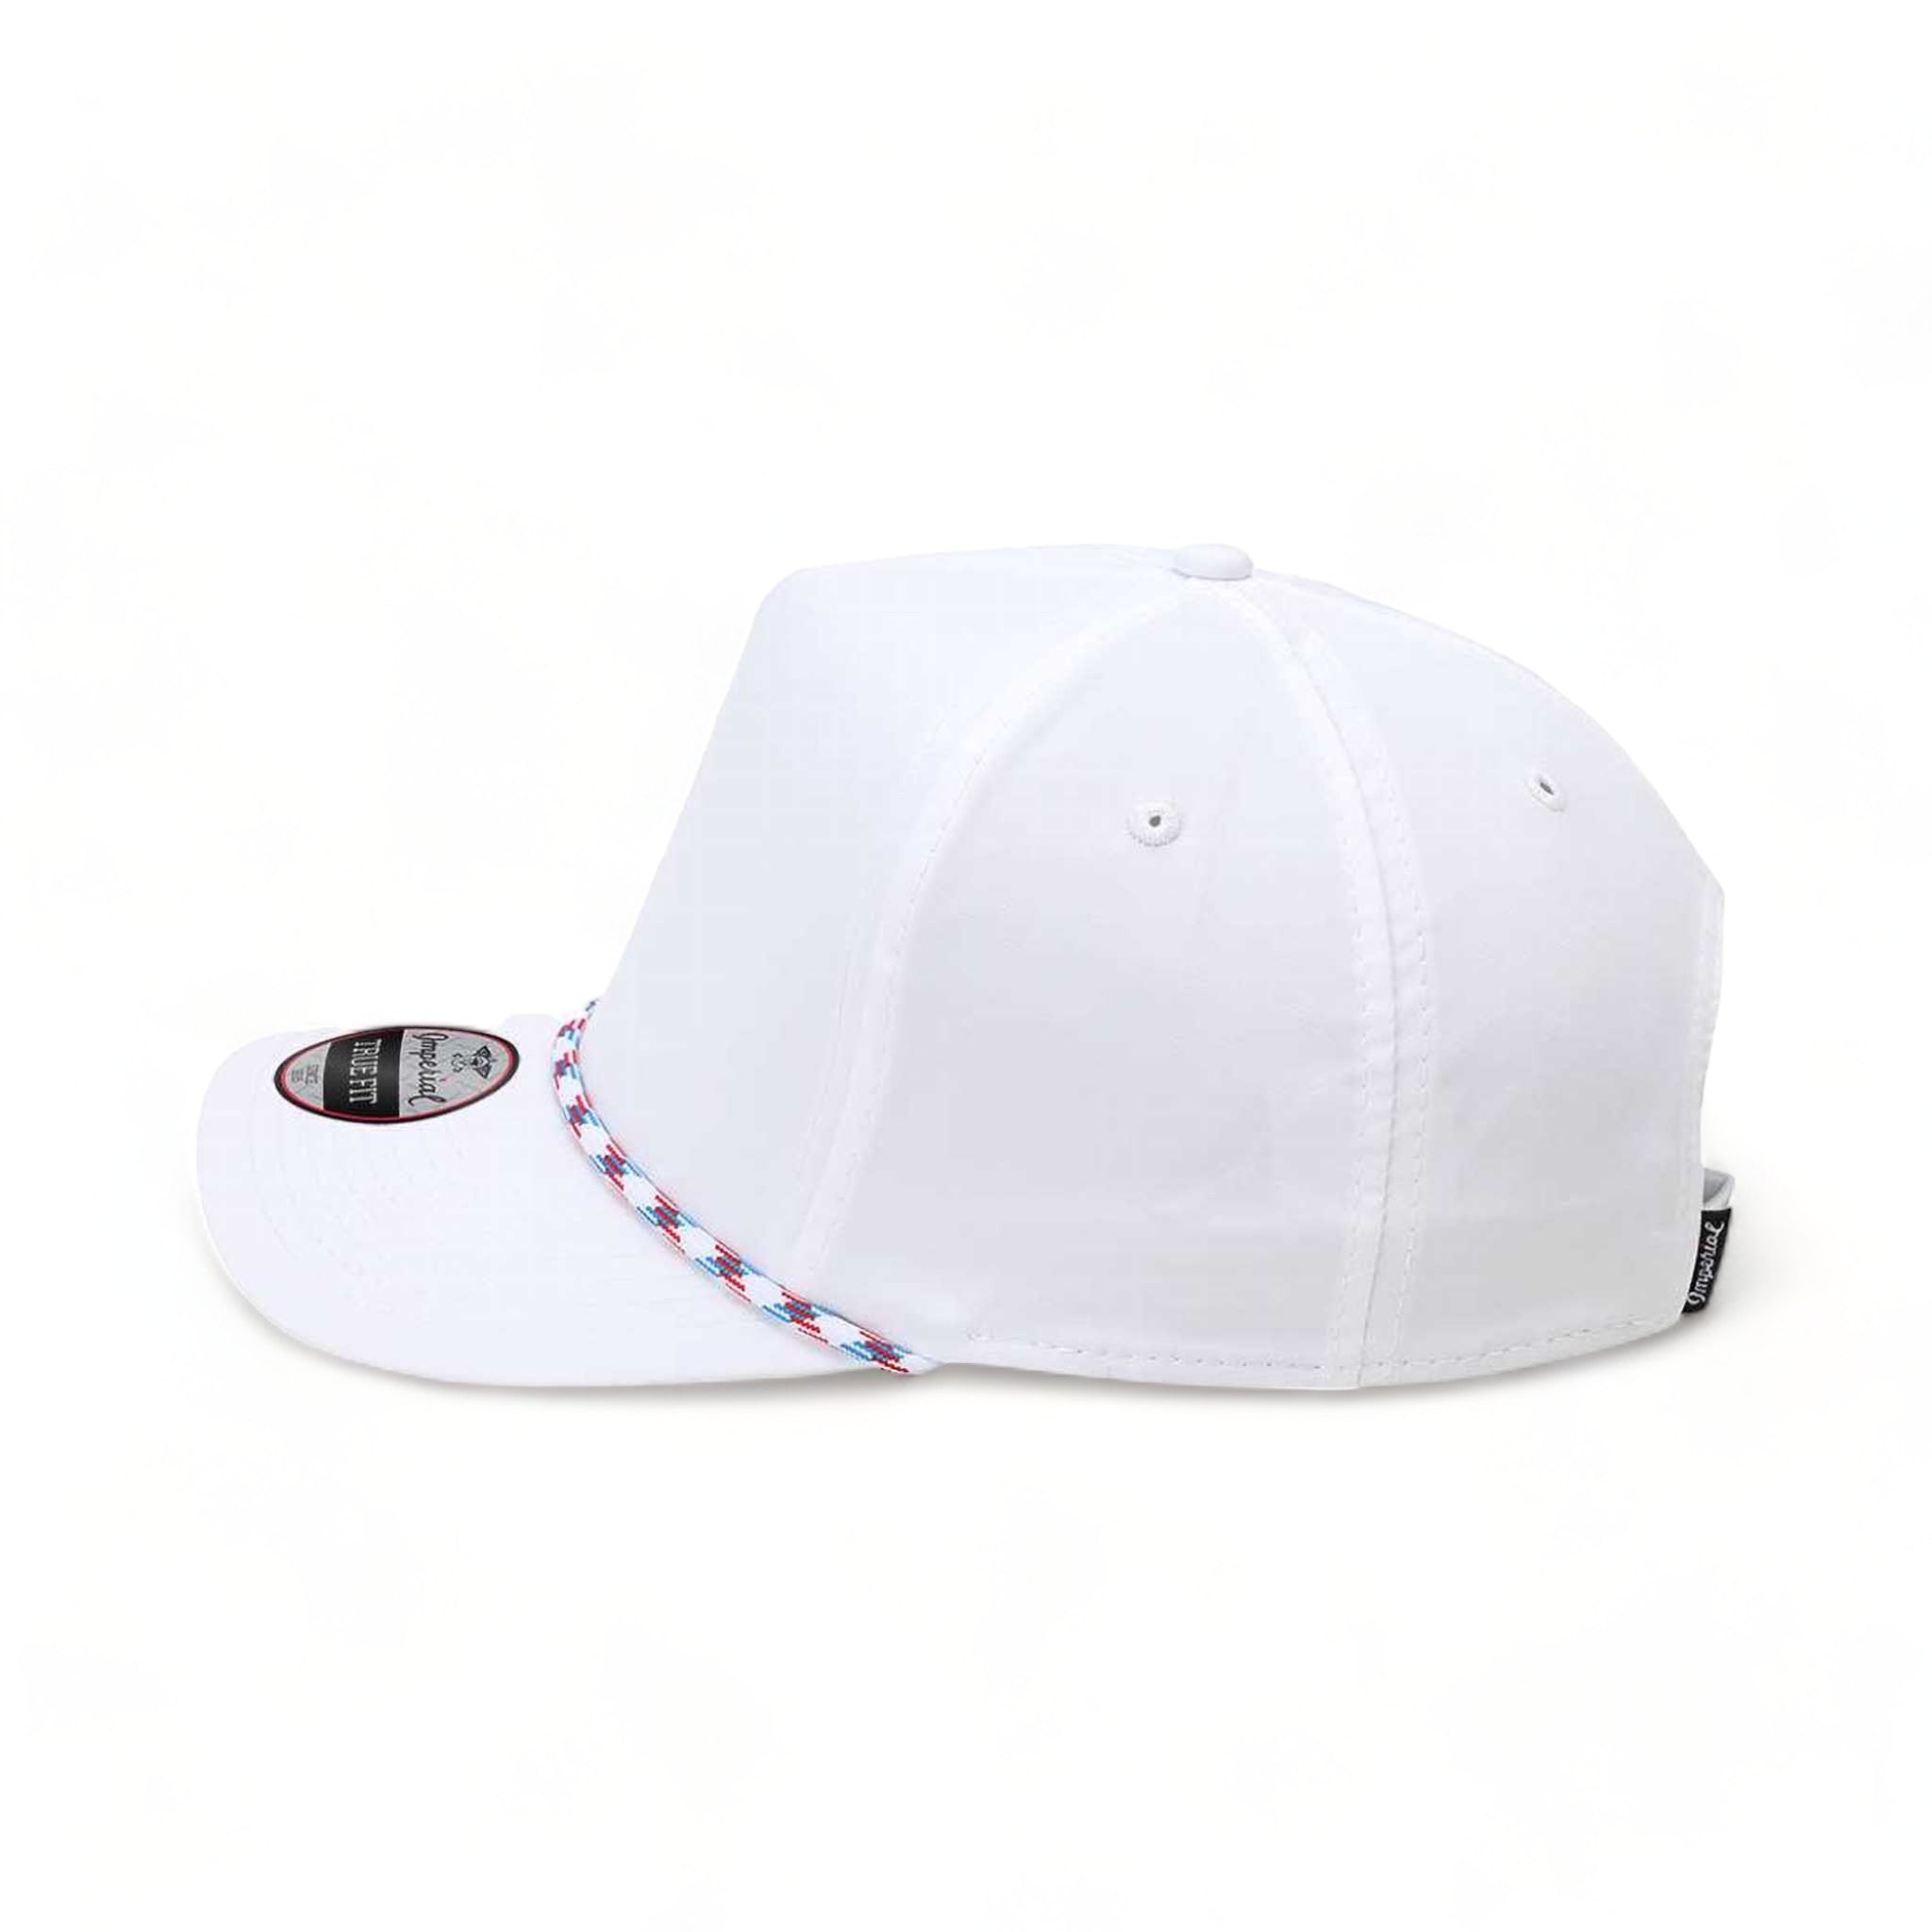 Side view of Imperial 5054 custom hat in white and light blue-red